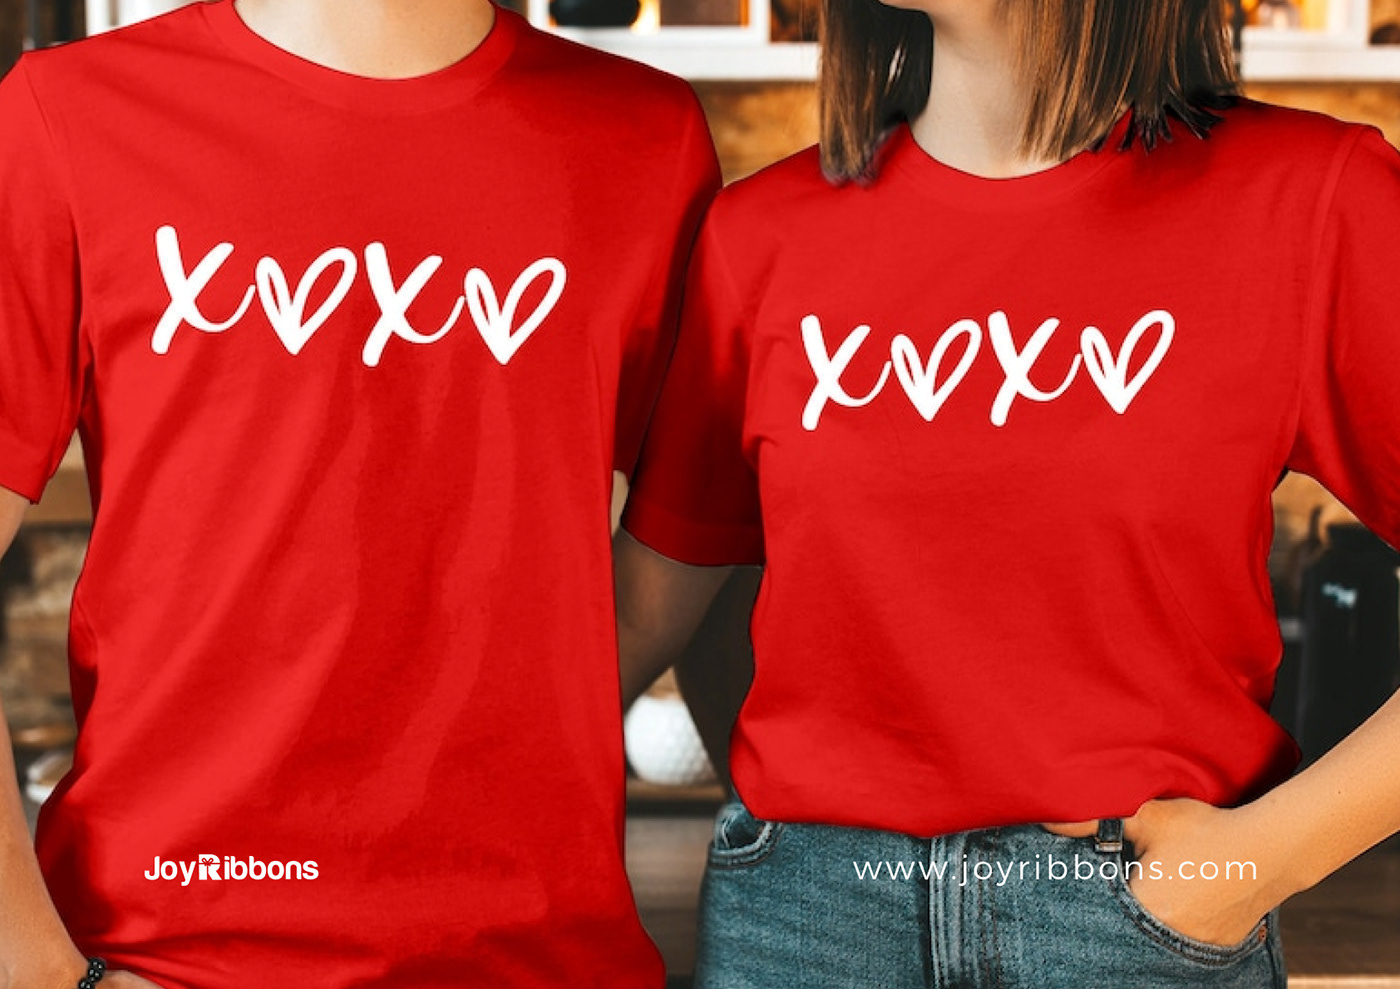 Shop valentine gifts for you and your lover(s) on JoyRibbons. We deliver to anywhere in Nigeria.